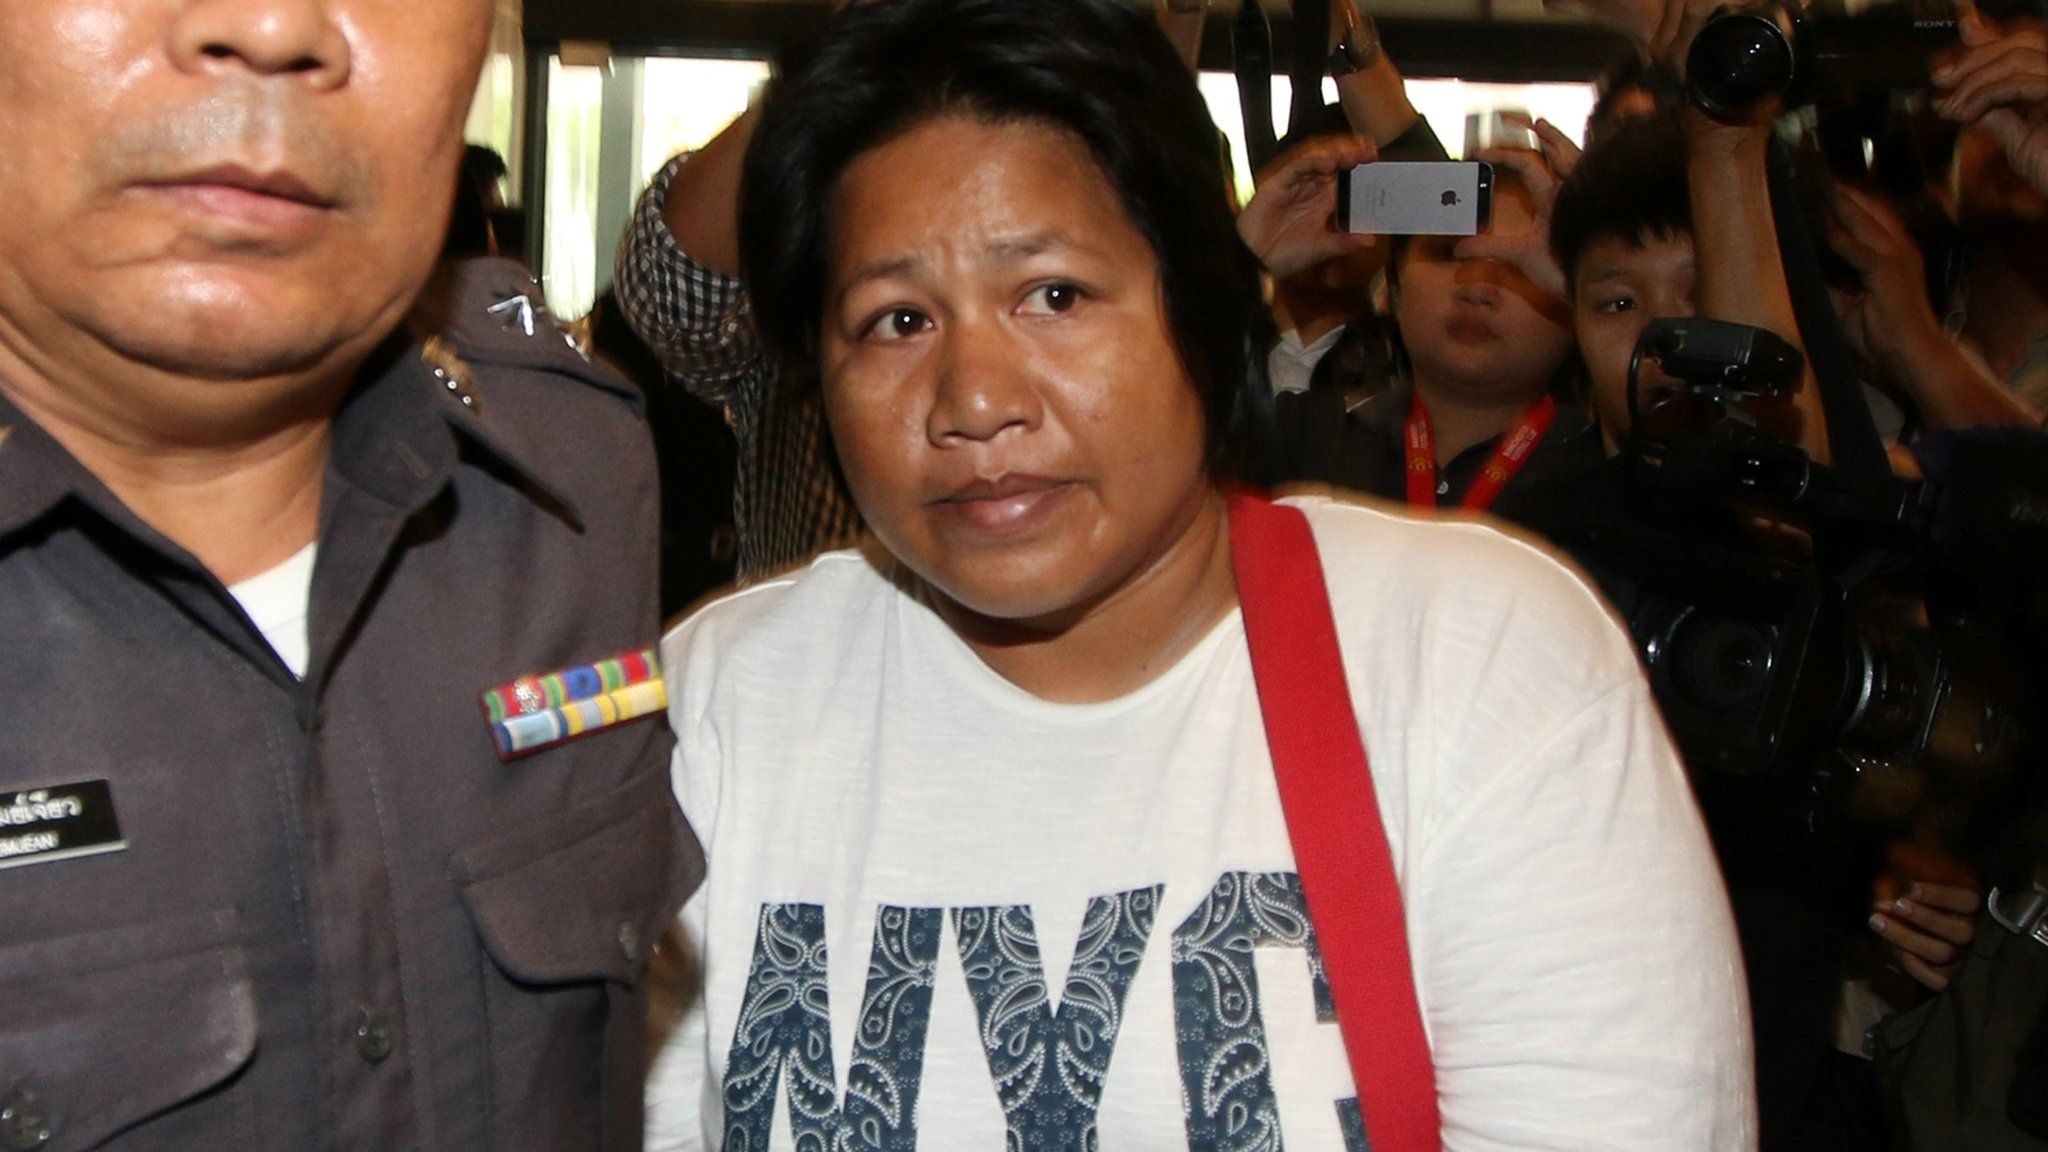 Patnaree Chankij, the mother of an anti-junta activist, is escorted by police as she arrives at a military court in Bangkok, Thailand